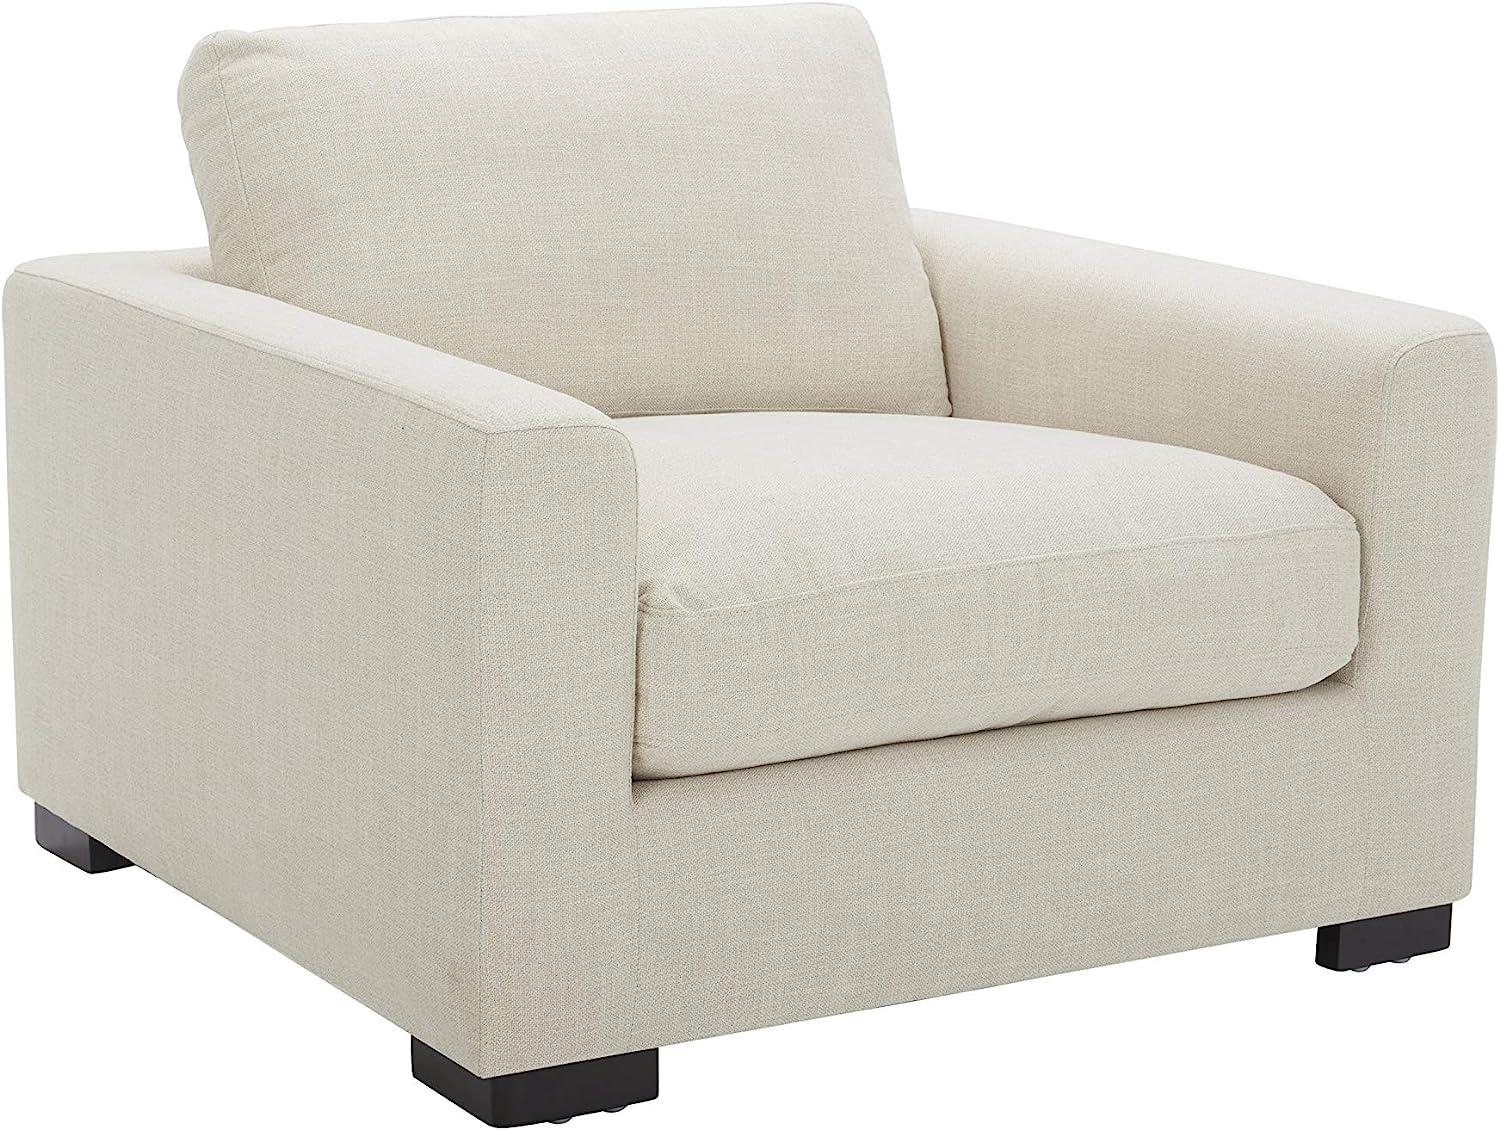 Amazon Brand Stone and Beam Westview Accent Living Room Chair for $361.40 Shipped